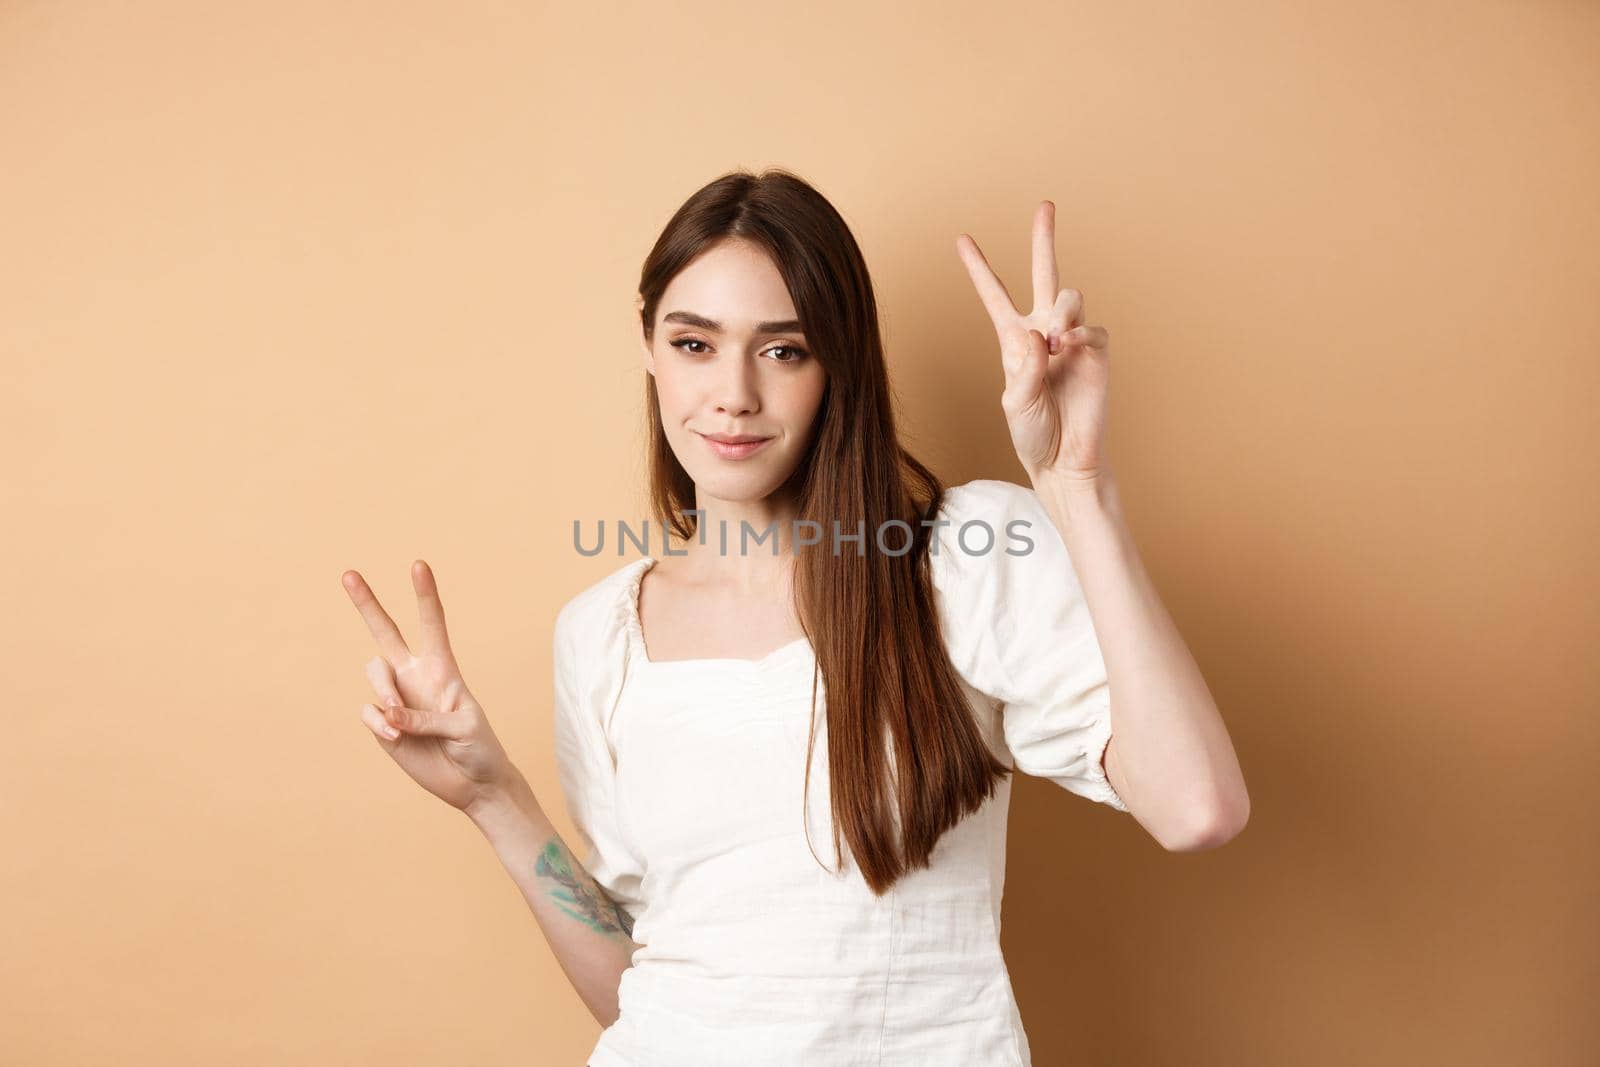 Cheerful attractive girl dancing and having fun, showing v-signs and looking positive at camera, standing on beige background.